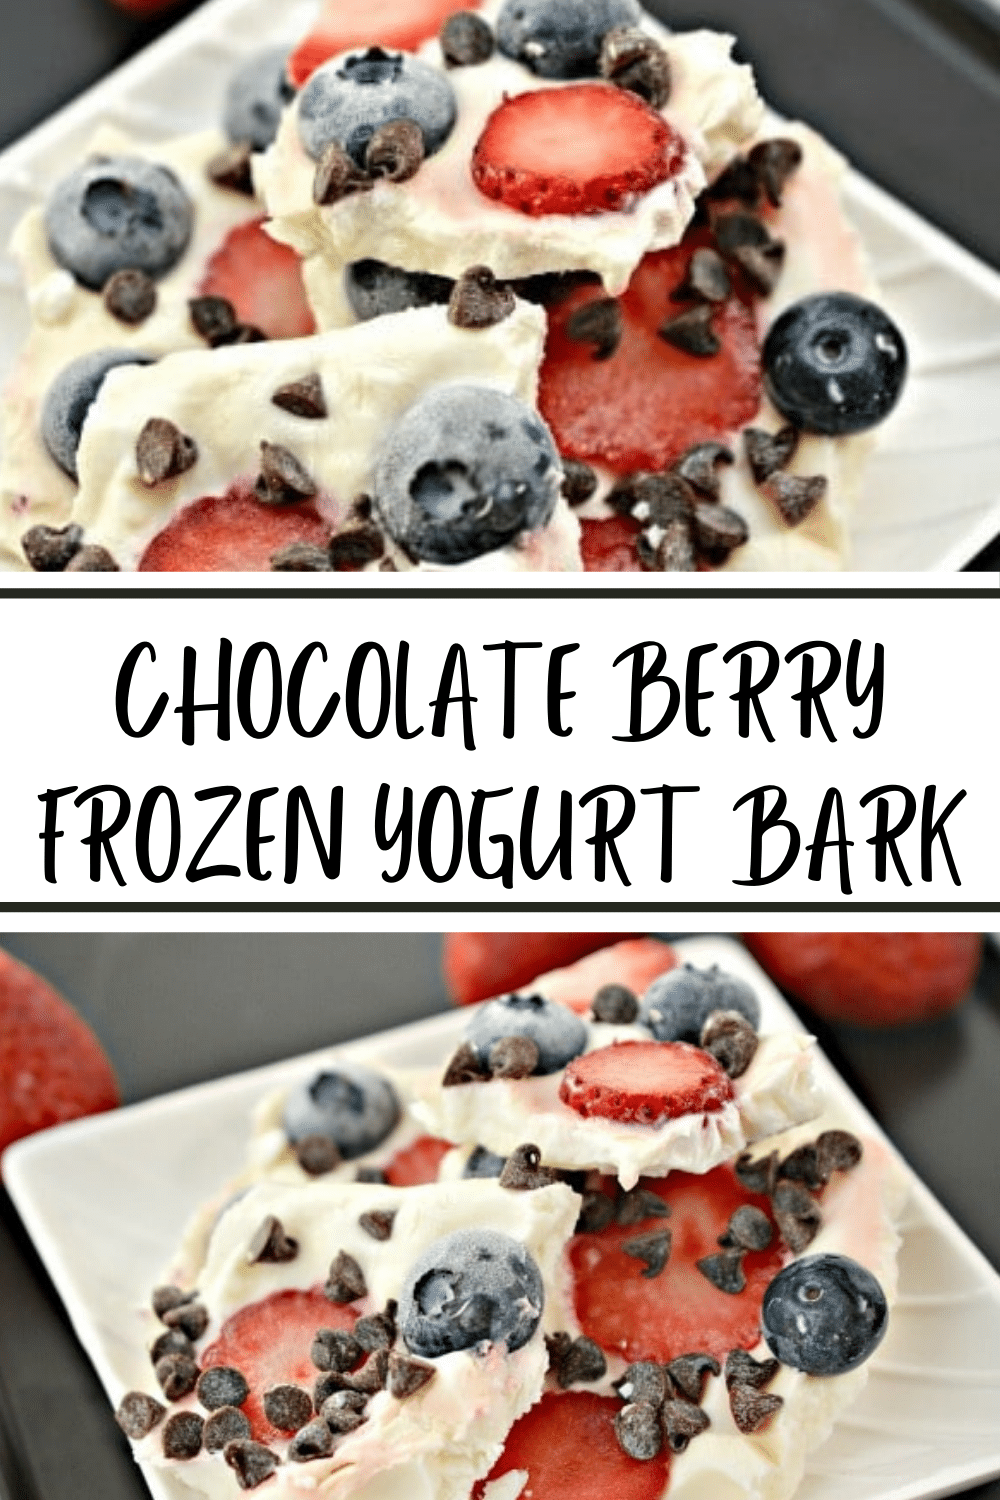 Chocolate Berry Frozen Yogurt Bark is a simple no bake dessert recipe with only 6 ingredients. This delicious treat is also a healthier option for dessert. #yogurt #greekyogurt #fruit #dessert via @wondermomwannab